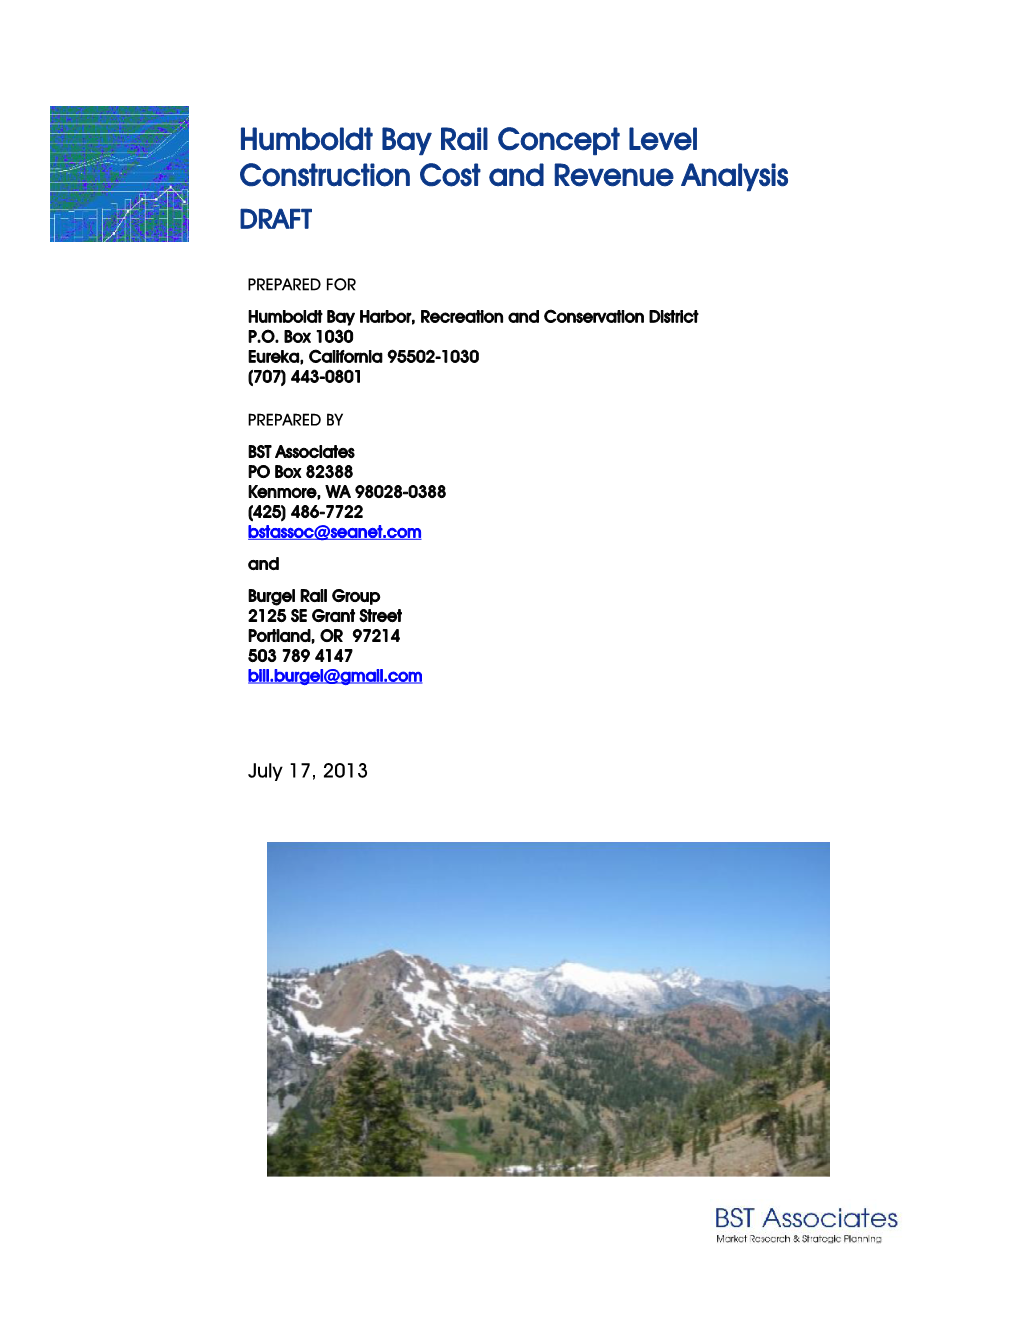 Humboldt Bay Rail Concept Level Construction Cost and Revenue Analysis DRAFT